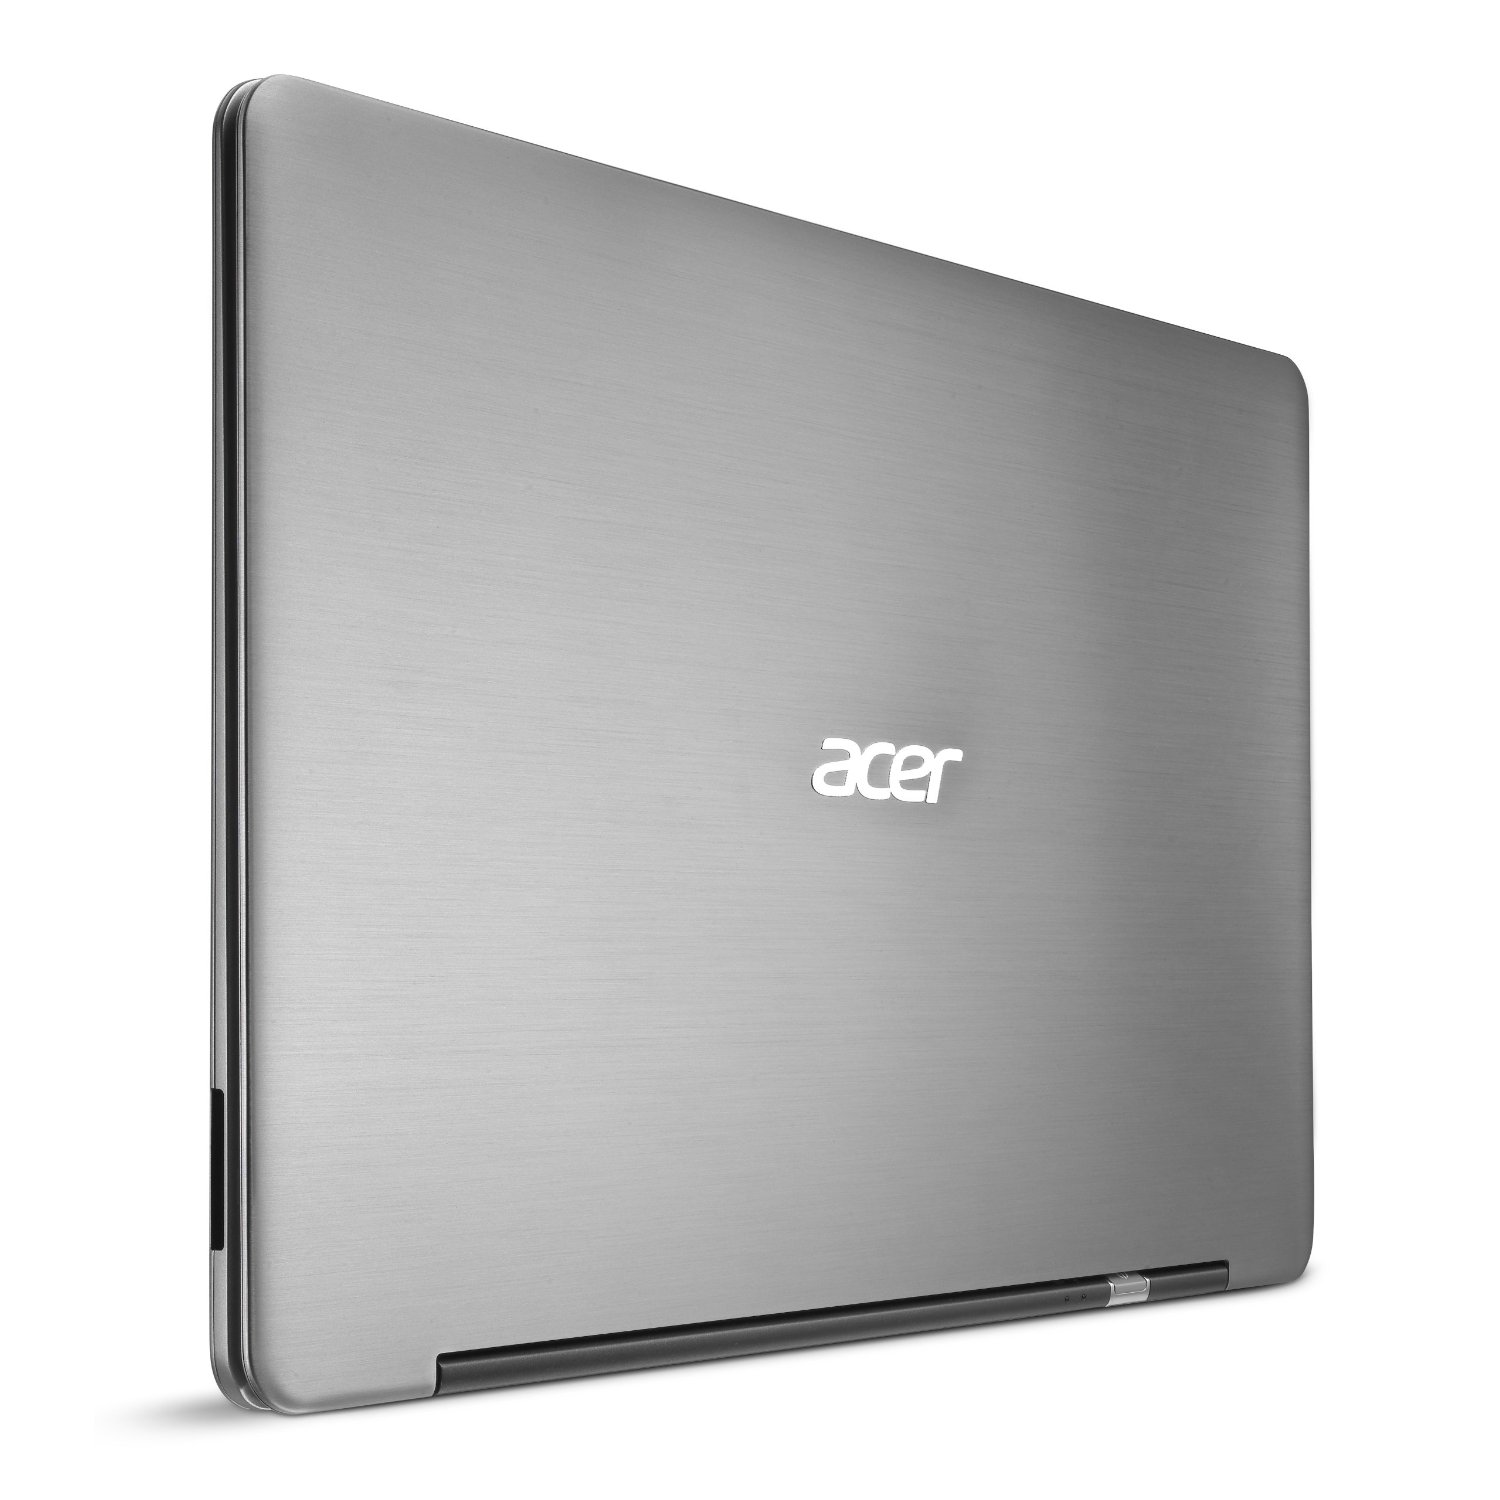 http://thetechjournal.com/wp-content/uploads/images/1111/1322192769-acer-aspire-s39516828-133inch-hd-display-ultrabook-10.jpg